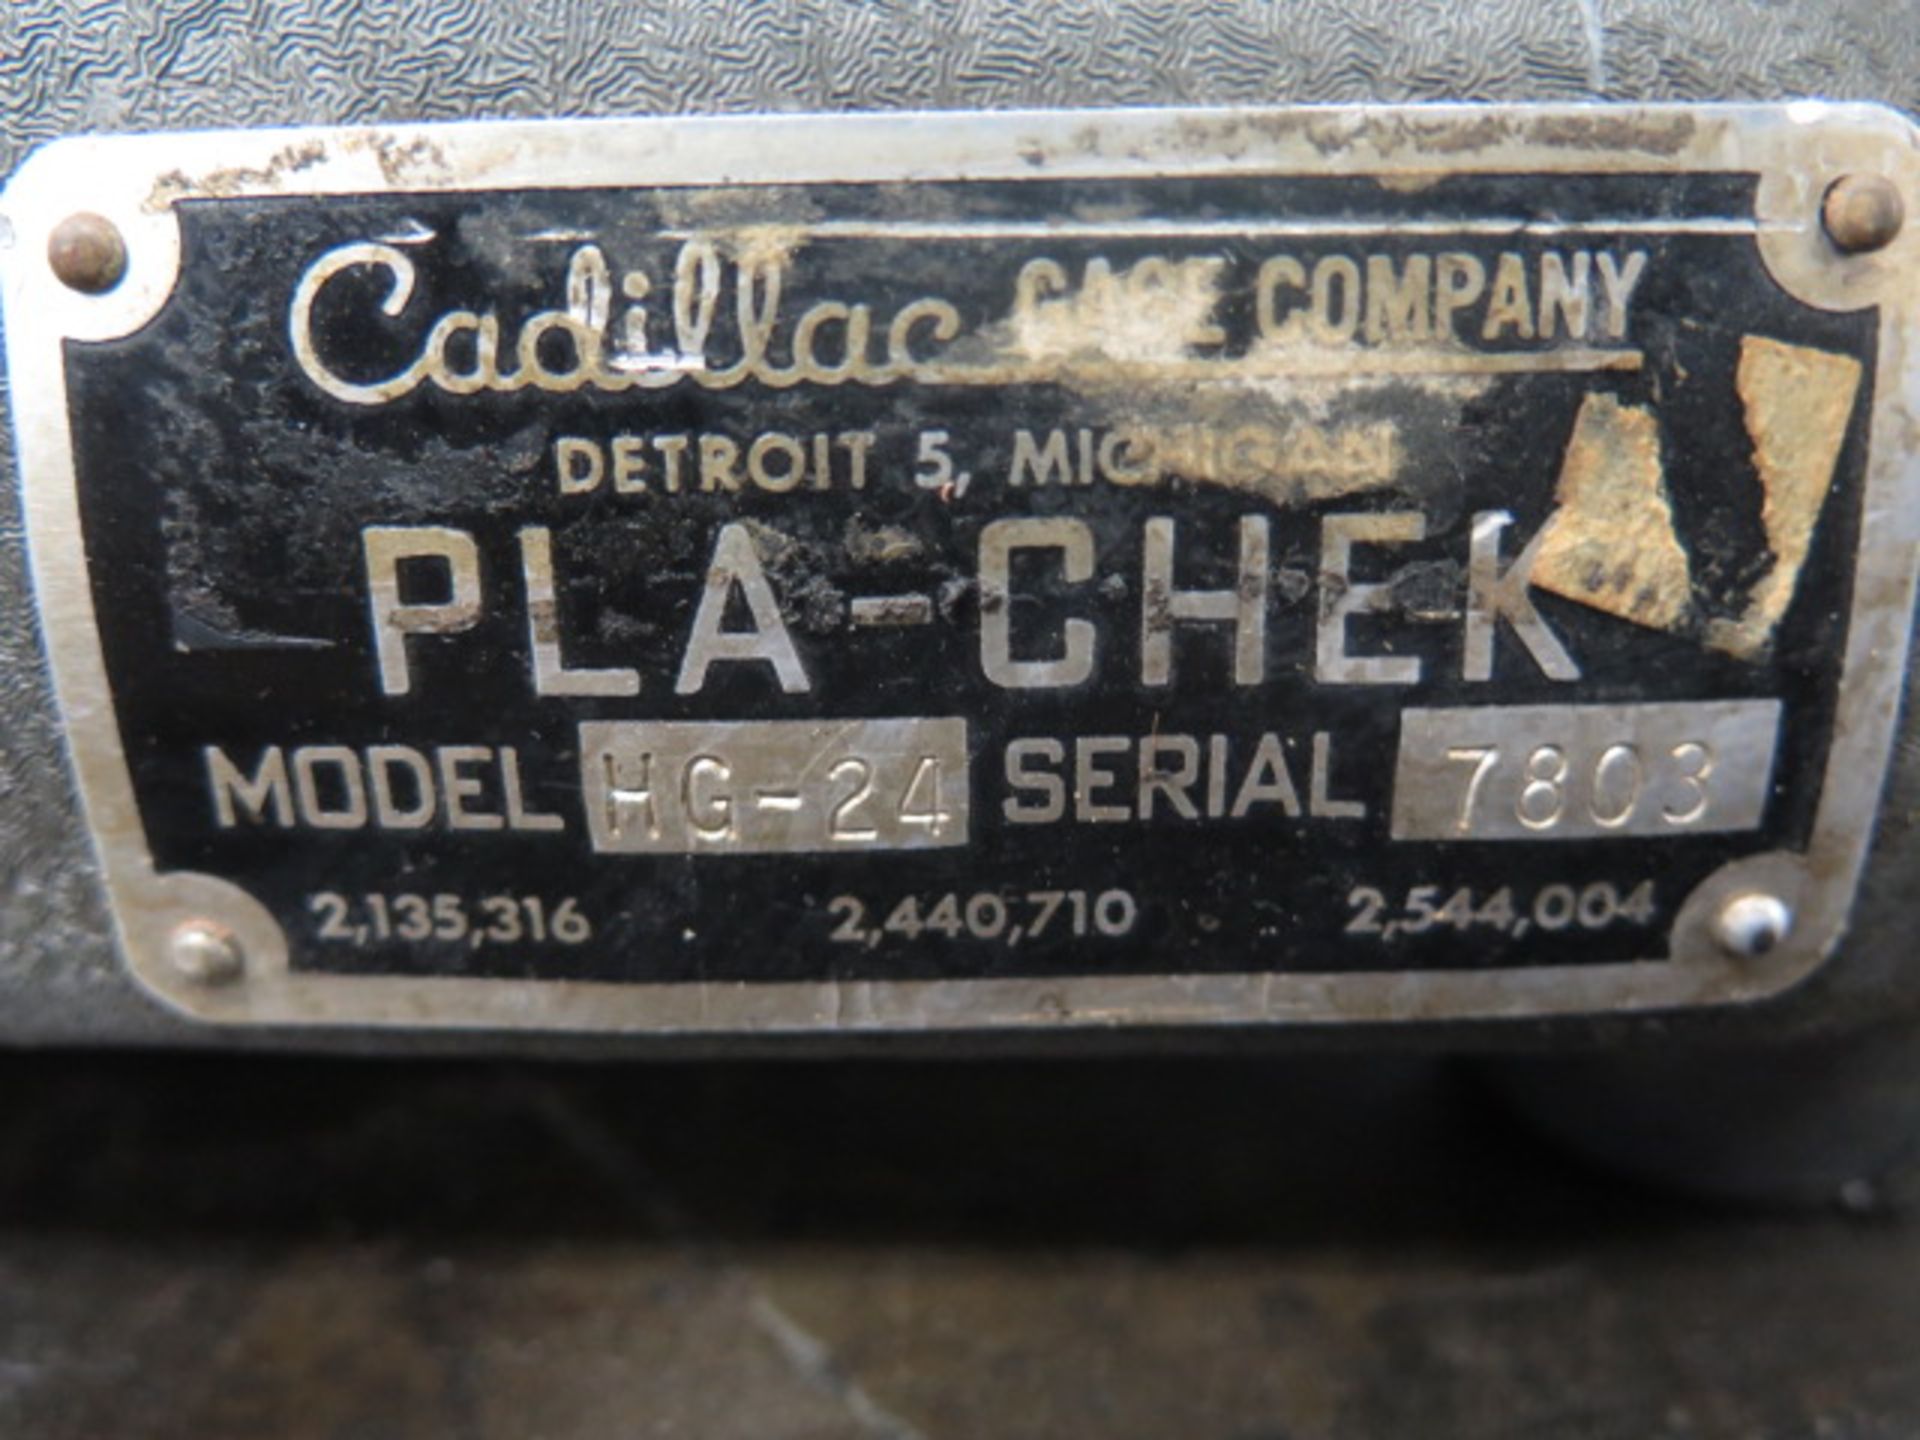 Cadillac Pla-Chek Height Gage - Image 4 of 4